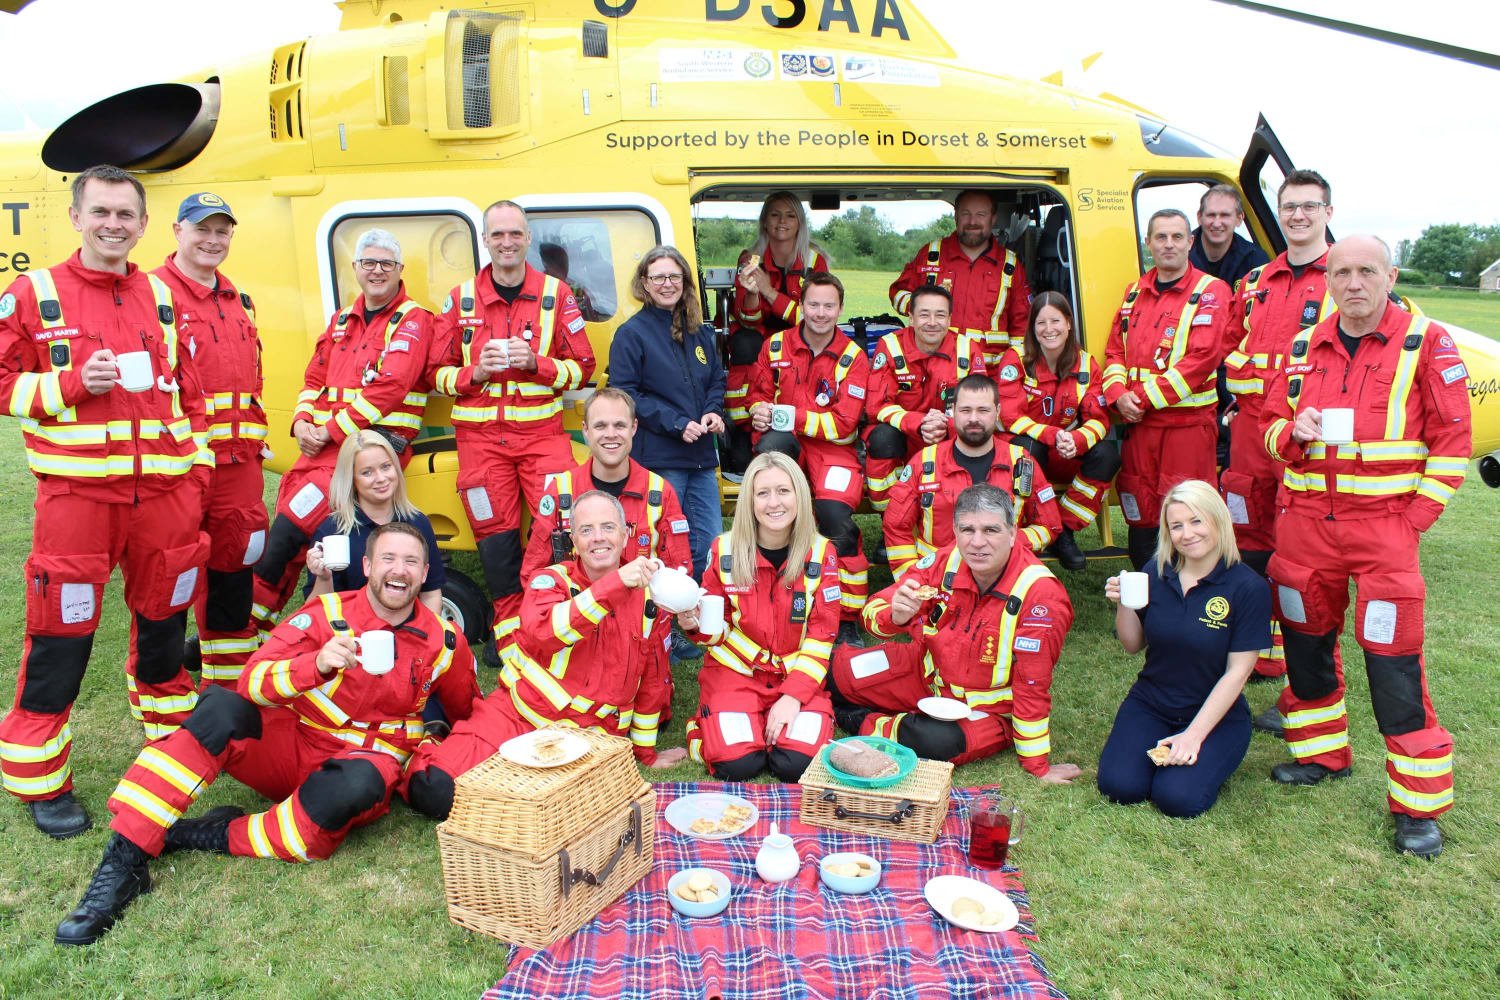 The Dorset and Somerset Air Ambulance crew enjoying a cuppa and cake.